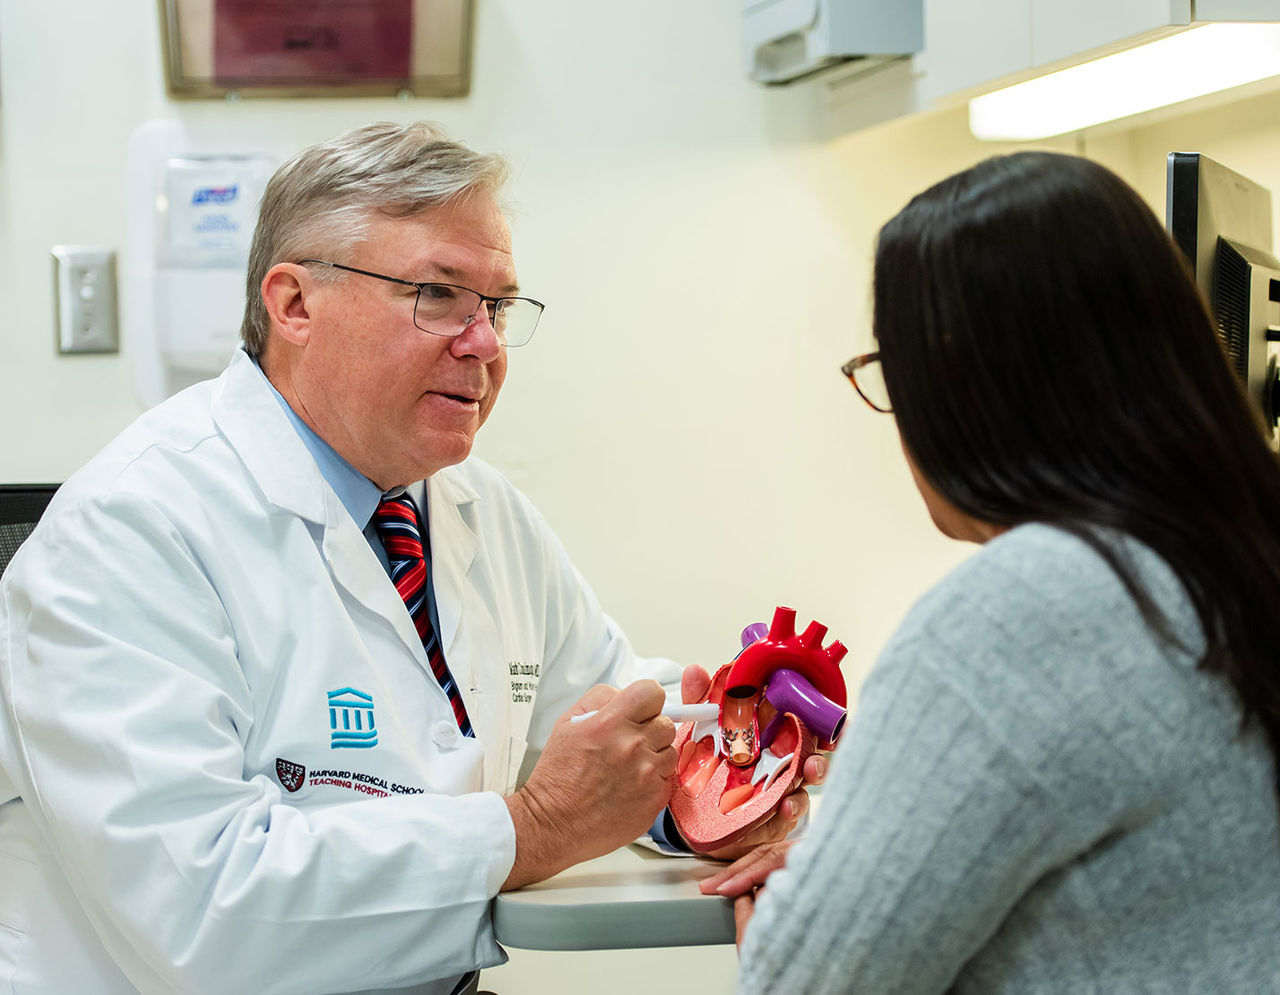 male provider holding a 3D model of the human heart while talking to female patient